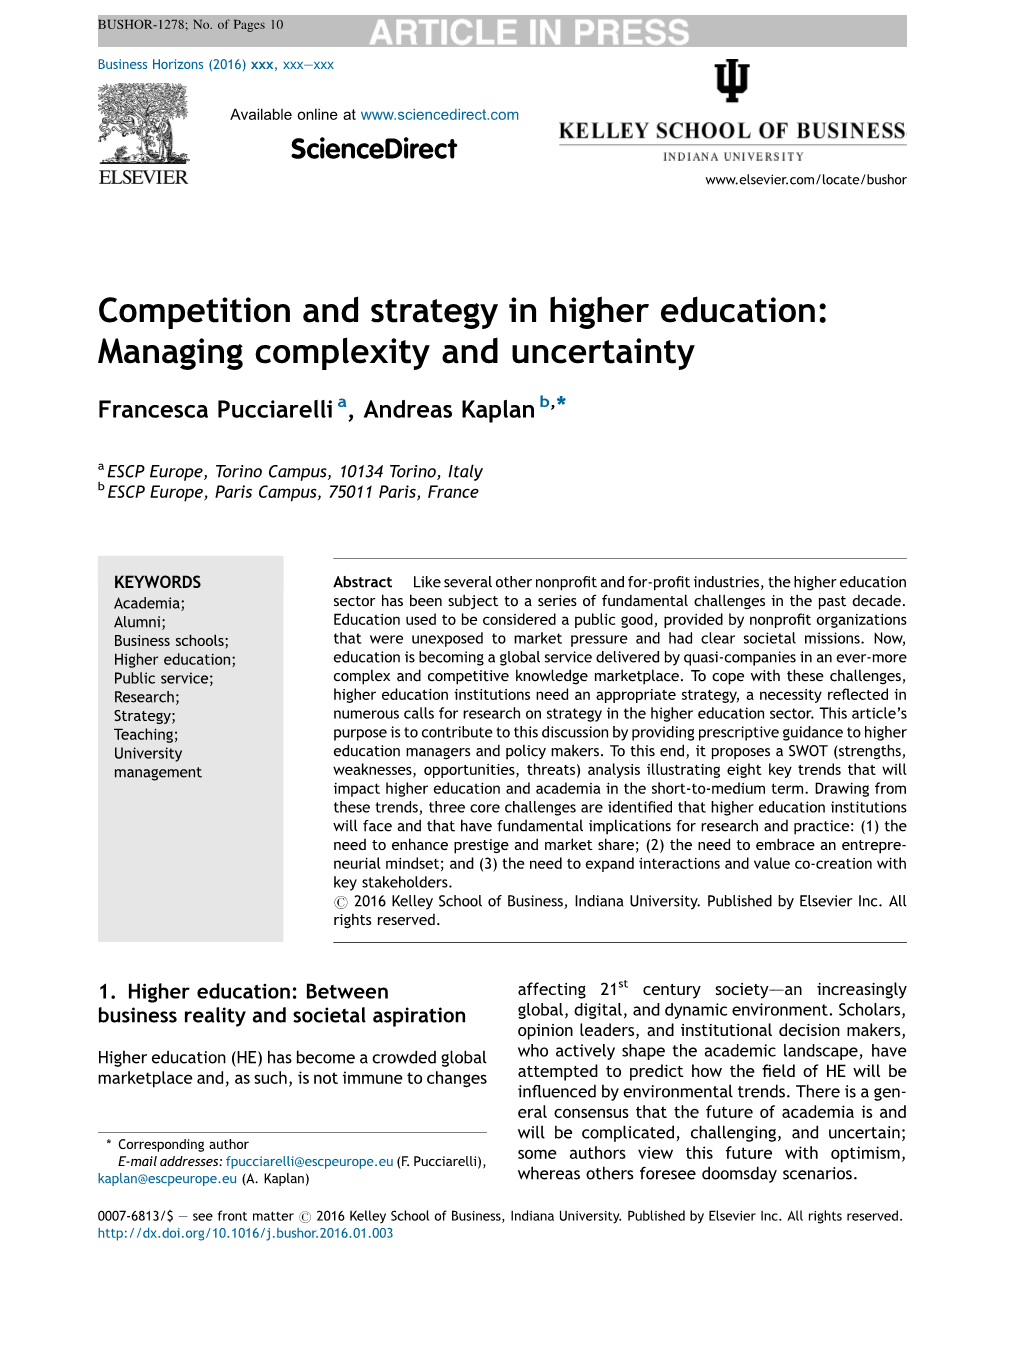 Competition and Strategy in Higher Education: Managing Complexity and Uncertainty 3